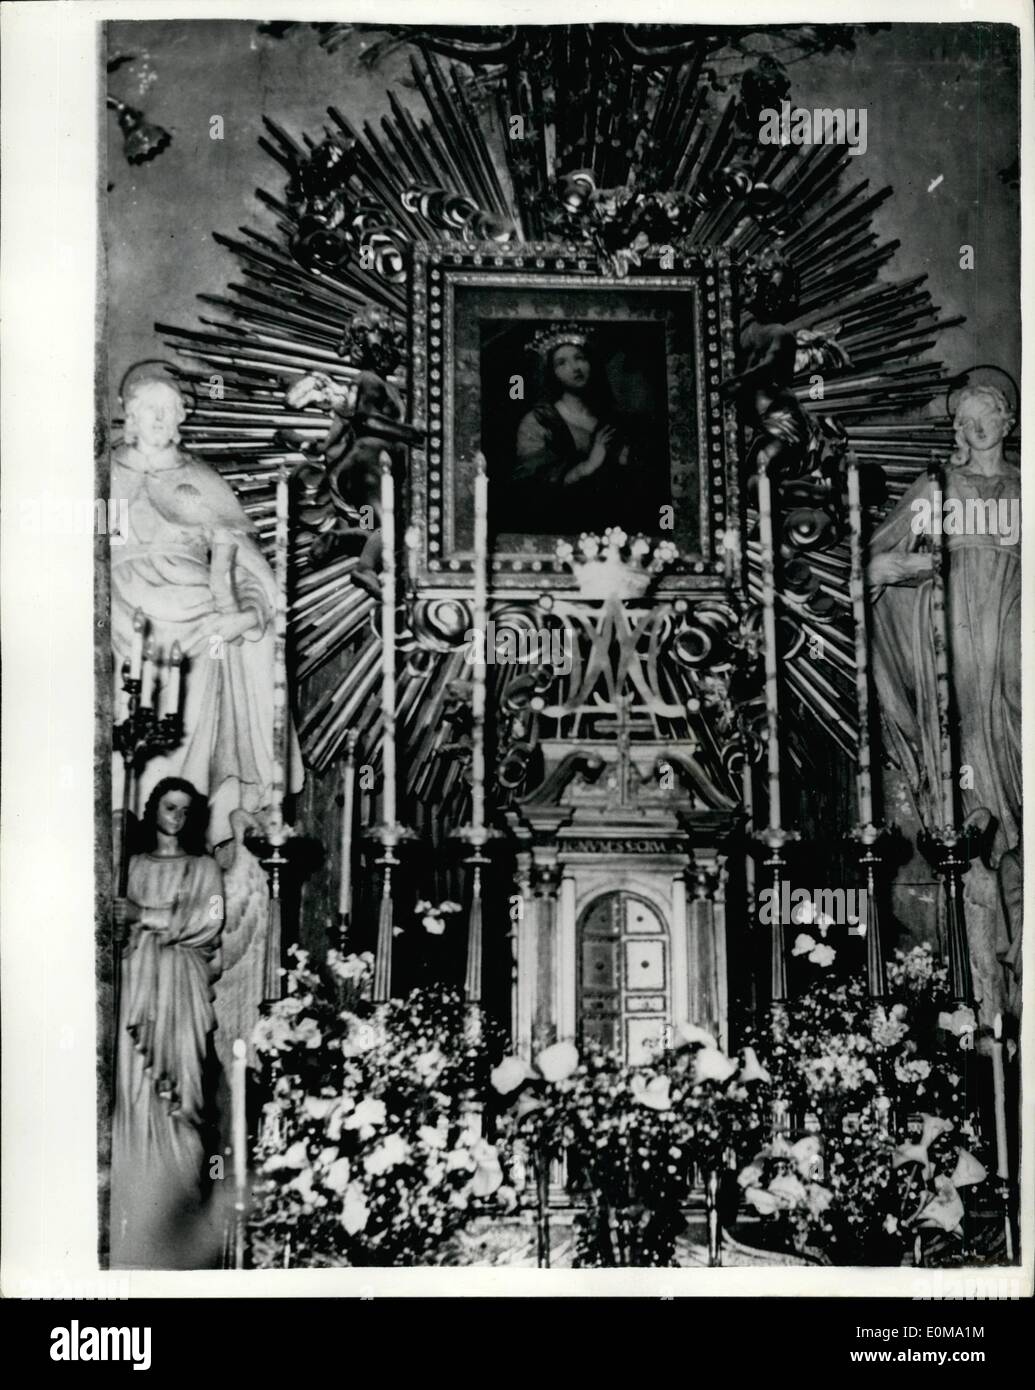 May 05, 1954 - Another ''Miracle'' Claimed In Italy. Eyes Of A Portrait Said To Have Moved. Photo Shows:- The heavily edecked portrait of the Virgin Mary - at Vicovaro, Italy - which some Catholic Faithfuls have claimed to have seen the eyes actually move. The town of Vicovaro is 50 km from Rome. Stock Photo